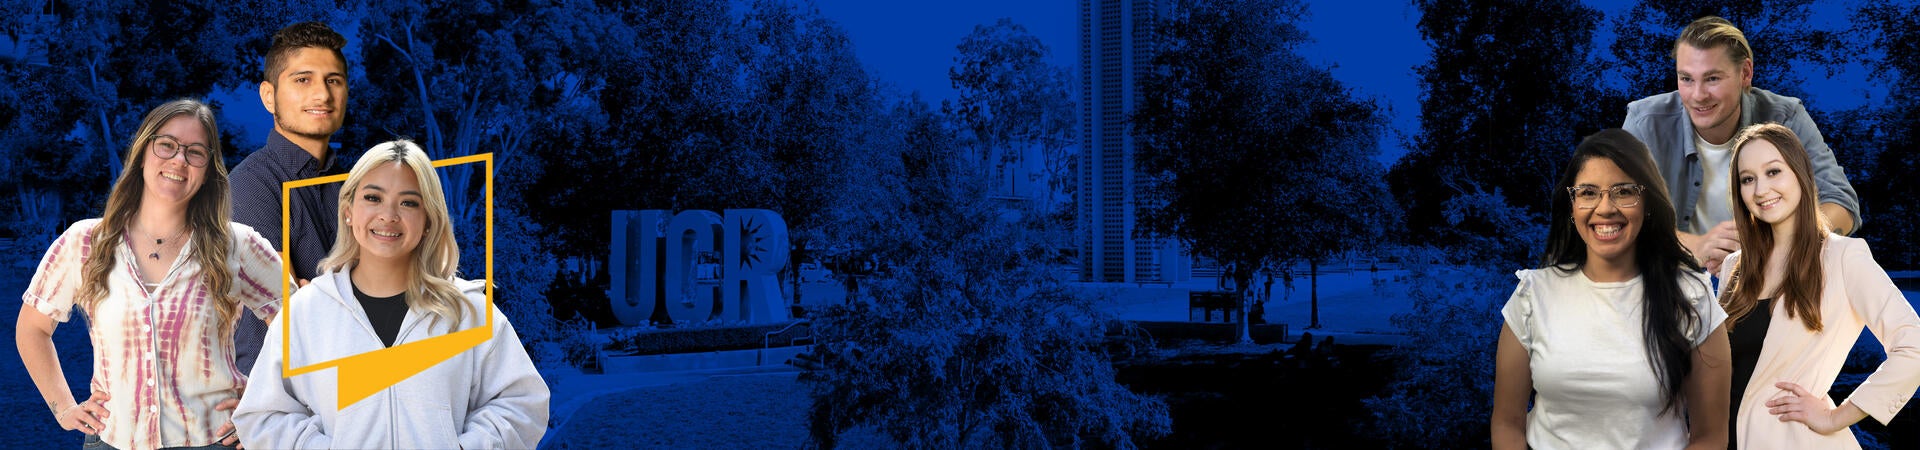 Six UCR students appear in two clusters - the background is a view of the campus but has a blue transparency over it. The first cluster of students on the left has two female students in the front and a male student in behind them. The student on the front right has the gold UCR icon framing her face. The second cluster of students on the right also has two females in front and a male student behind them.